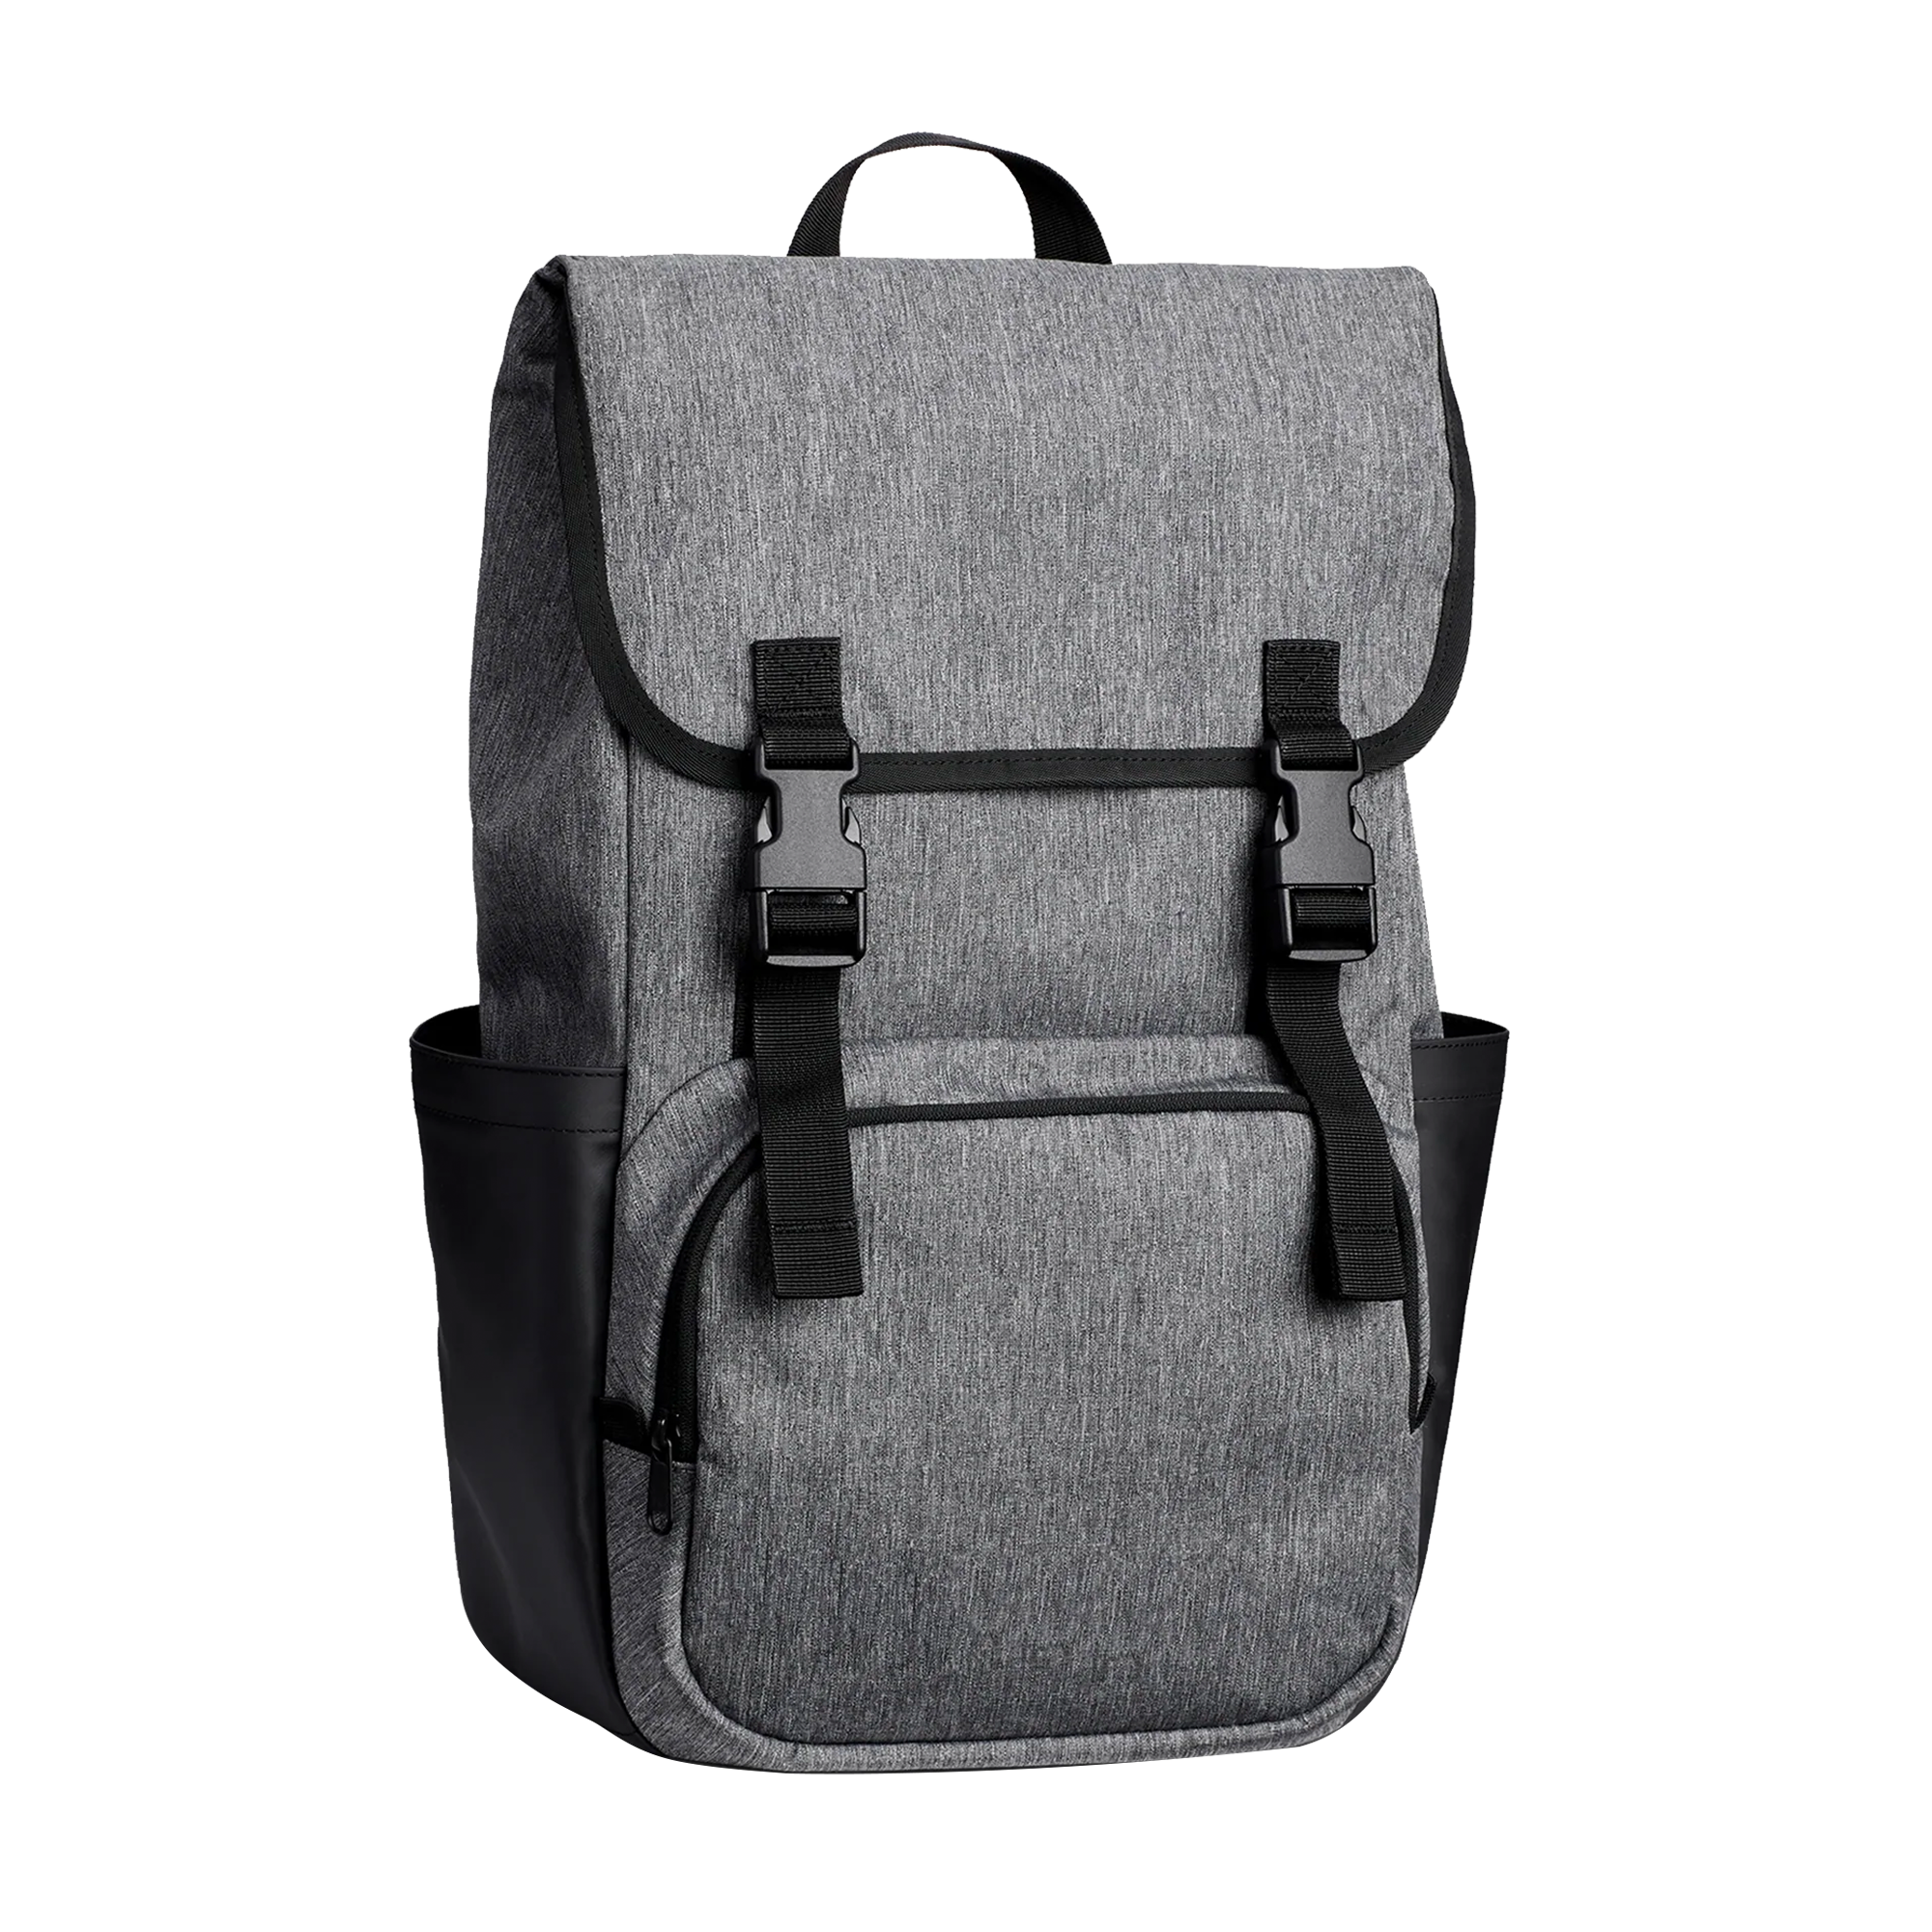 Customized Timbuk2 Incognito Flap Backpack | Printfection